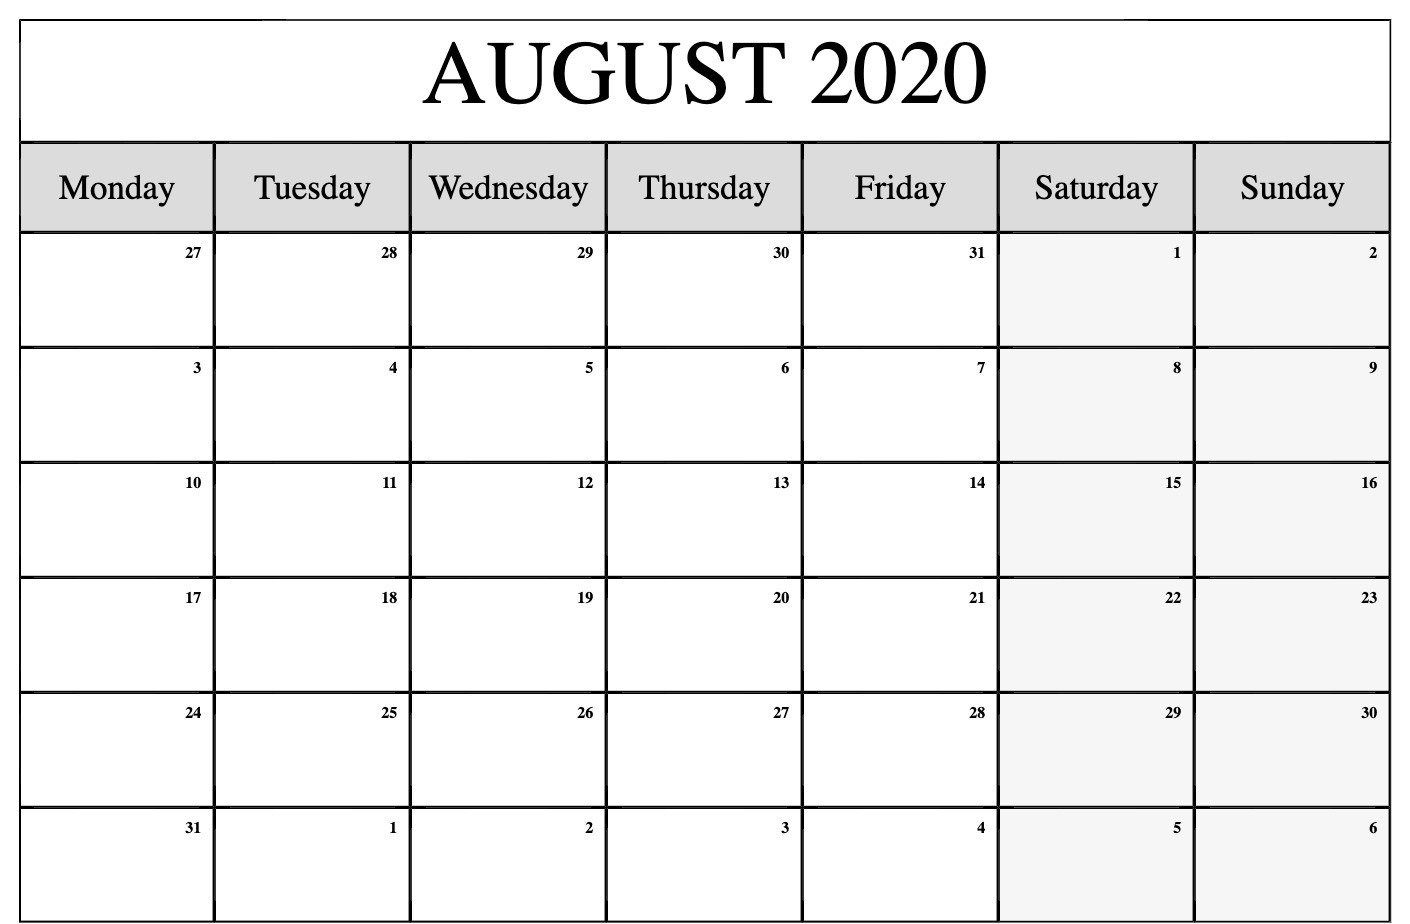 August 2020 Calendar Printable Template With Holidays-August To December Calendar Template 2020